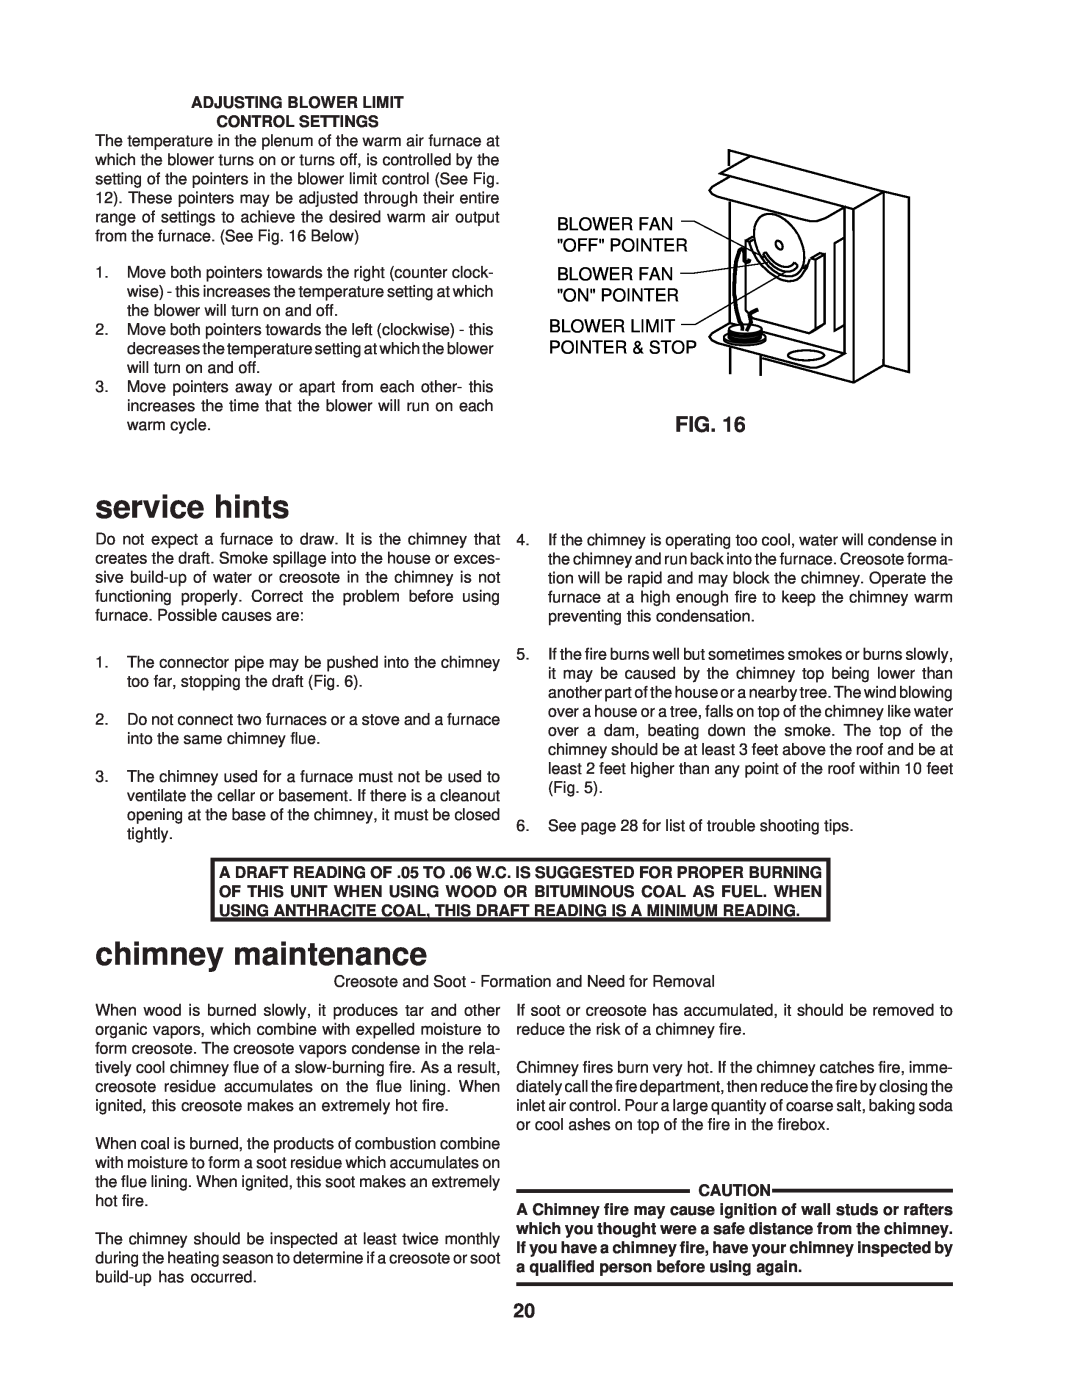 United States Stove 1537Q owner manual service hints, chimney maintenance, Blower Fan Off Pointer Blower Fan On Pointer 